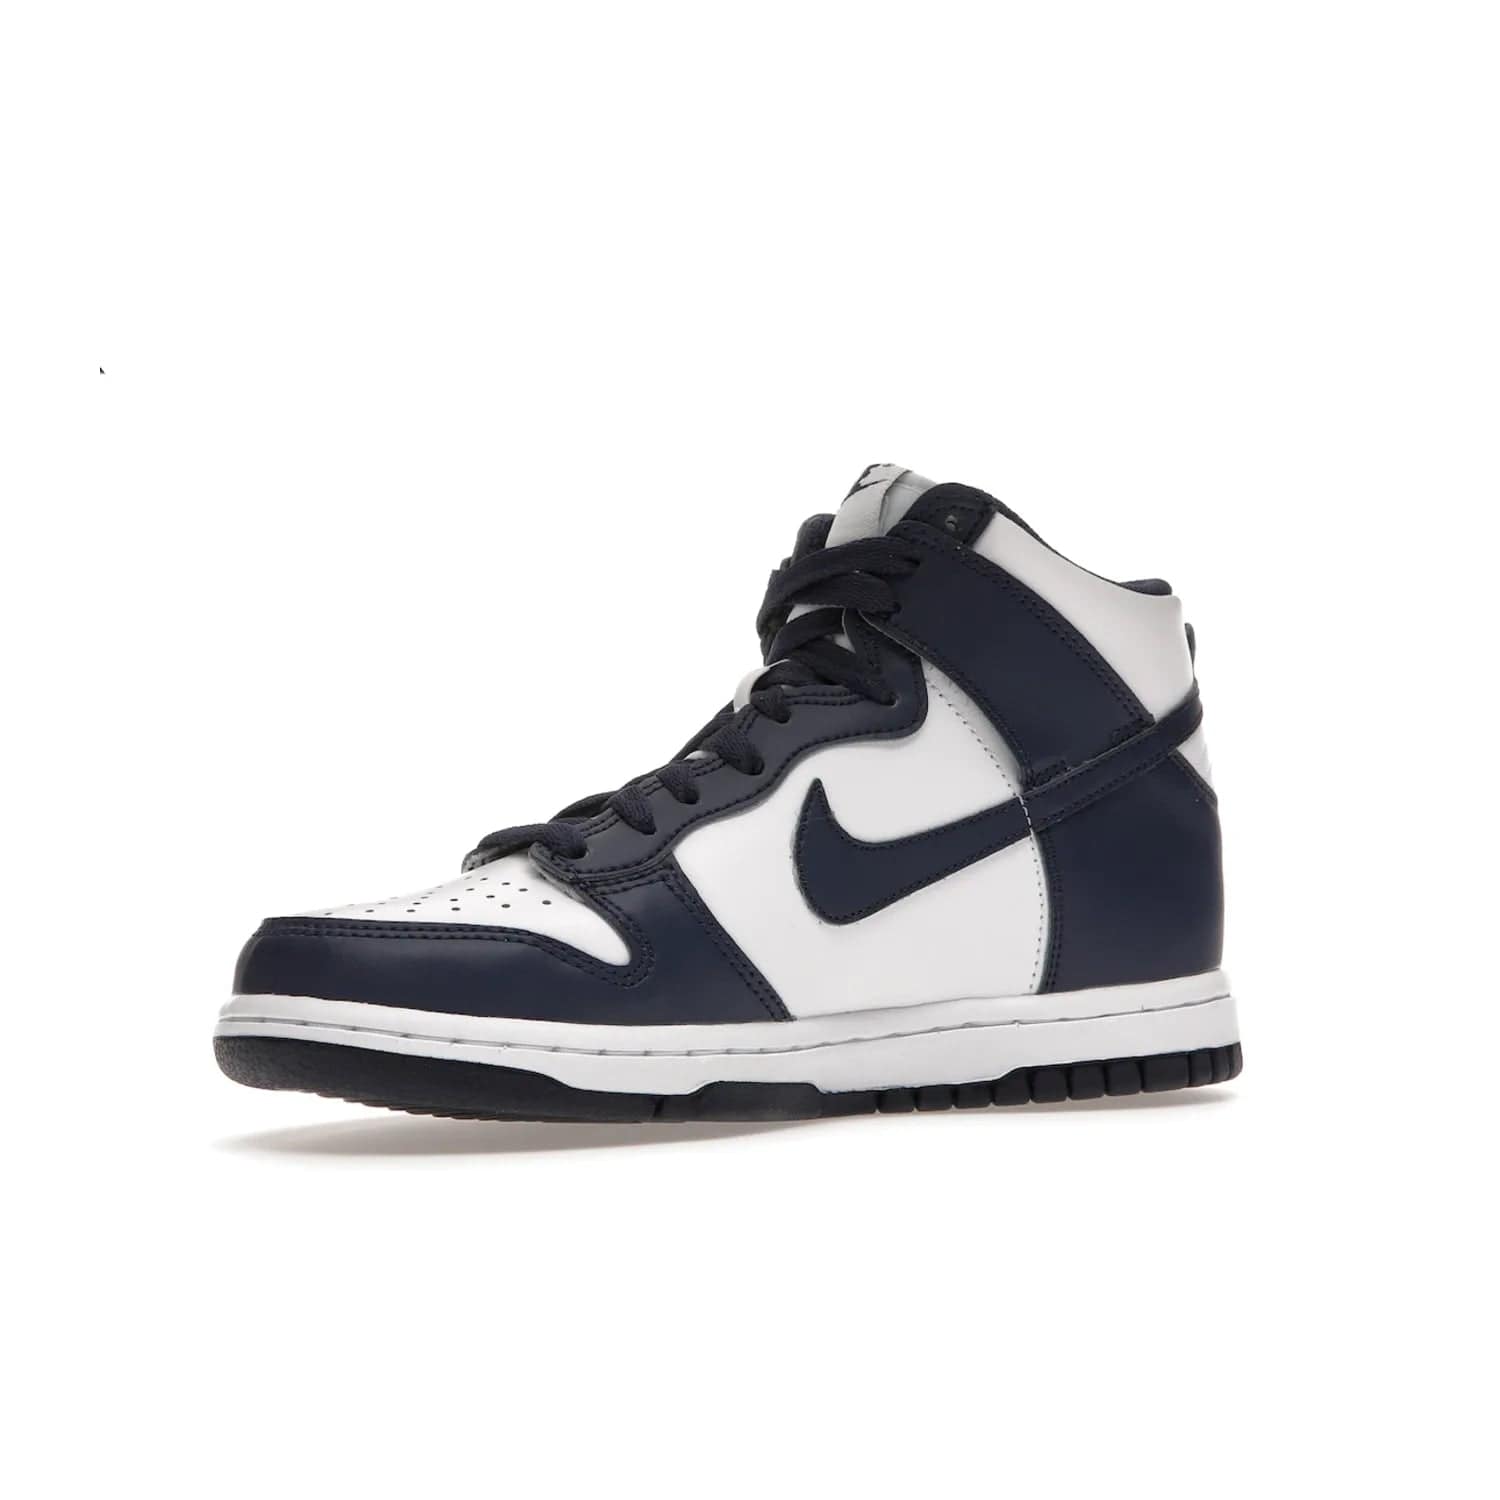 Nike Dunk High Championship Navy (GS) - Image 16 - Only at www.BallersClubKickz.com - Nike Dunk High Championship Navy GS: classic leather, suede, synthetic upper, chunky midsole, rubber herringbone sole. White base overlaid with Midnight Navy for a stylish finish. Padded high-cut collar and signature Nike swoosh design. Step out in these shoes and make a statement. Comfort and style at its finest.